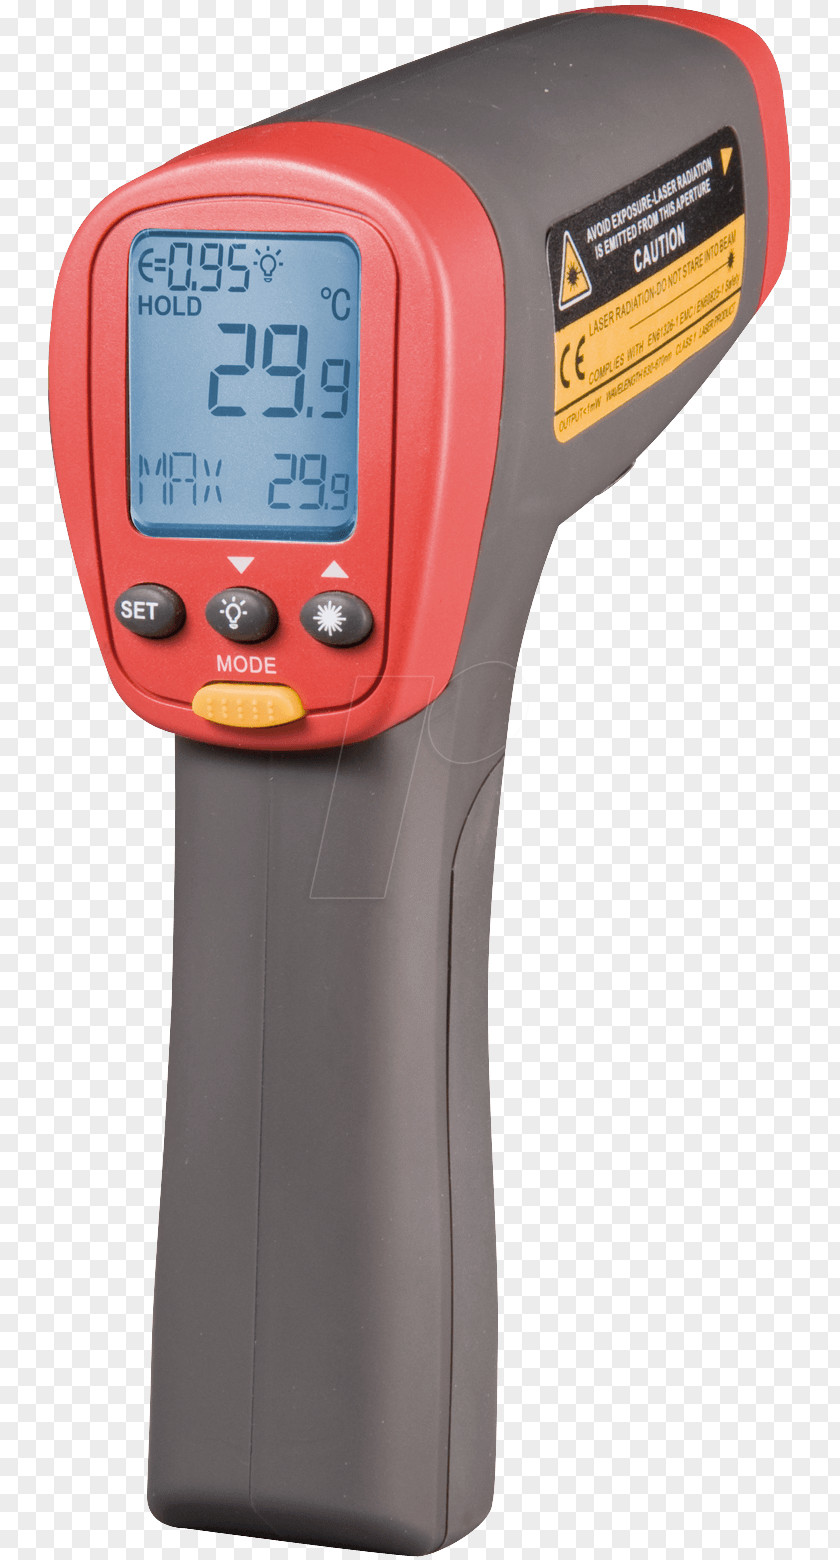 Thermometer Infrared Thermometers Laser Pointers Pyrometer PNG